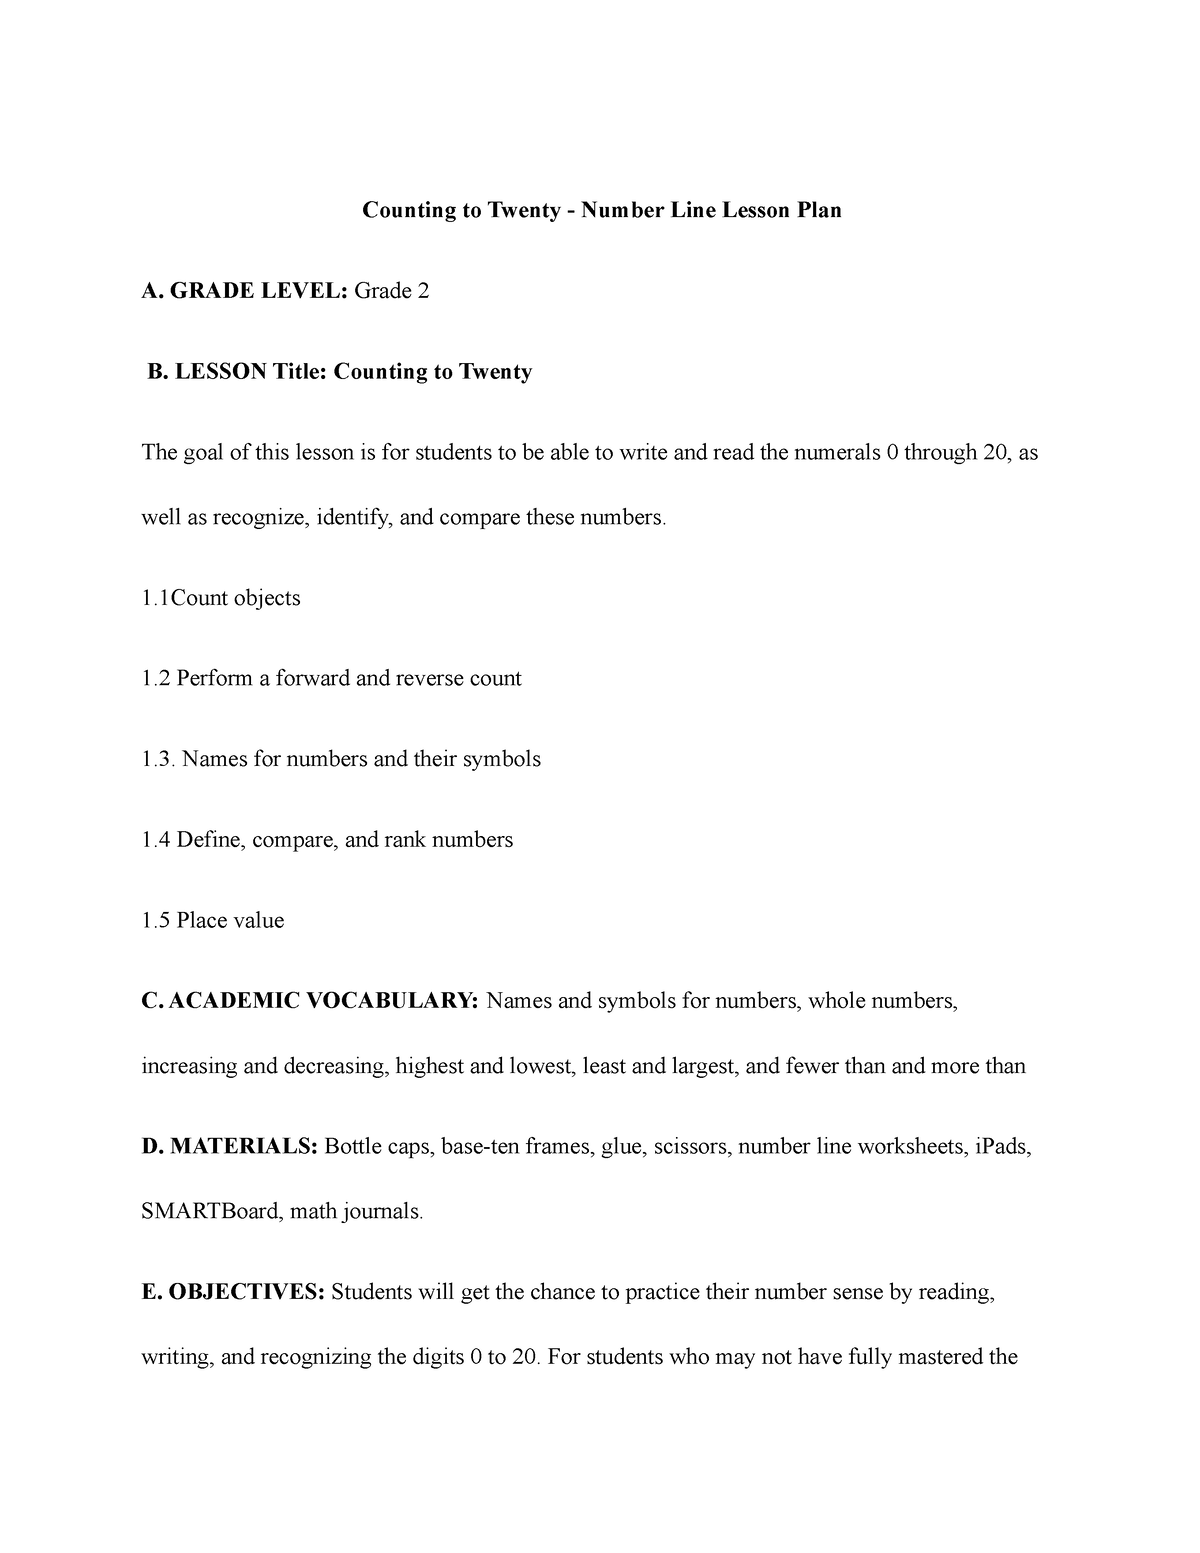 math-lesson-plan-number-line-counting-to-twenty-number-line-lesson